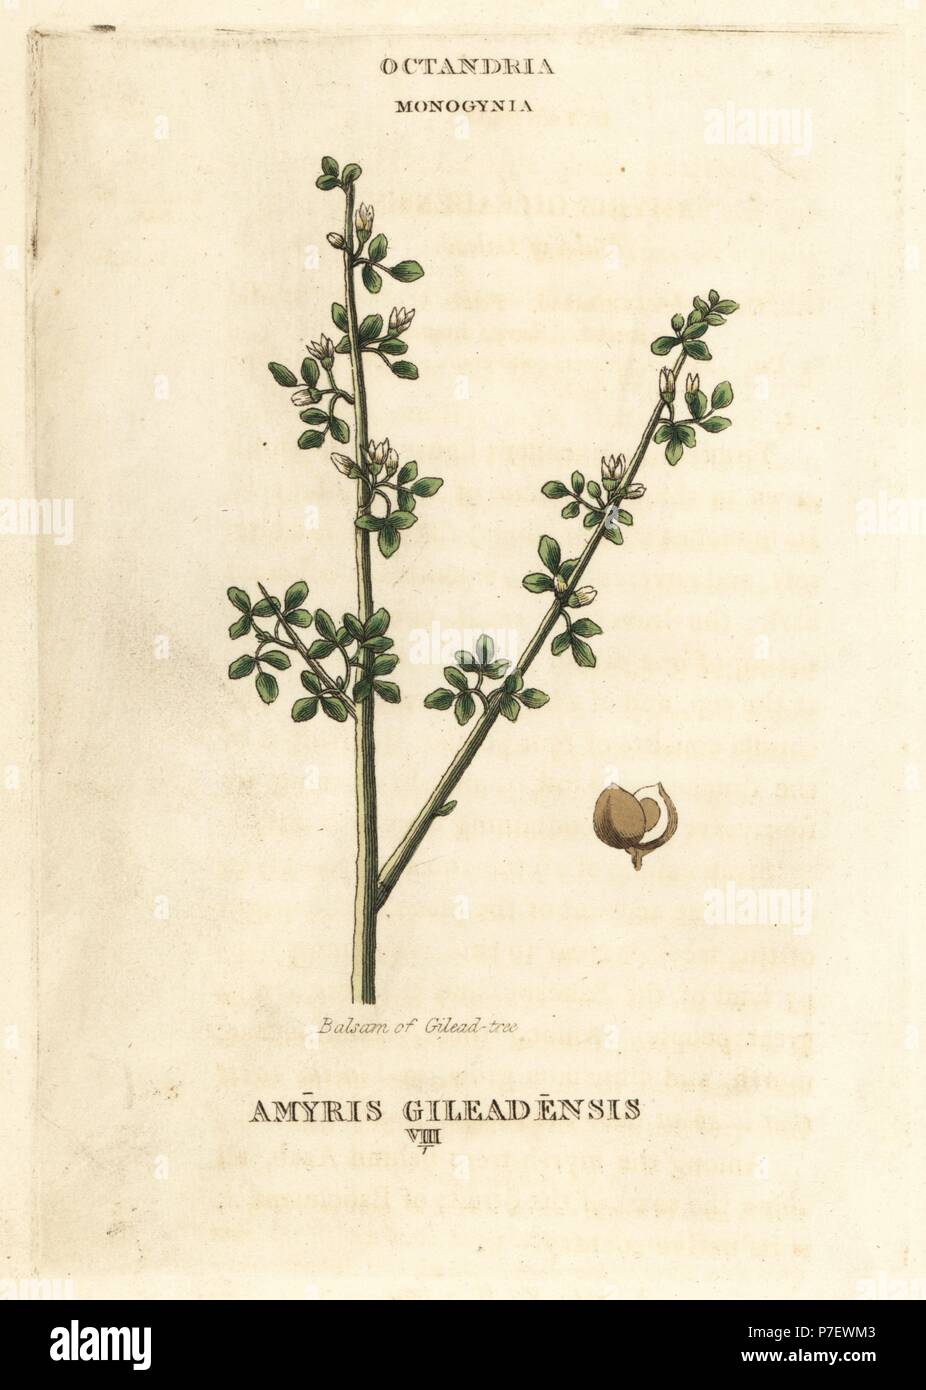 Balm of Gilead, Commiphora gileadensis (Balsam of Gilead tree, Amyris gileadensis). Handcoloured copperplate engraving after an illustration by Richard Duppa from his The Classes and Orders of the Linnaean System of Botany, Longman, Hurst, London, 1816. Stock Photo